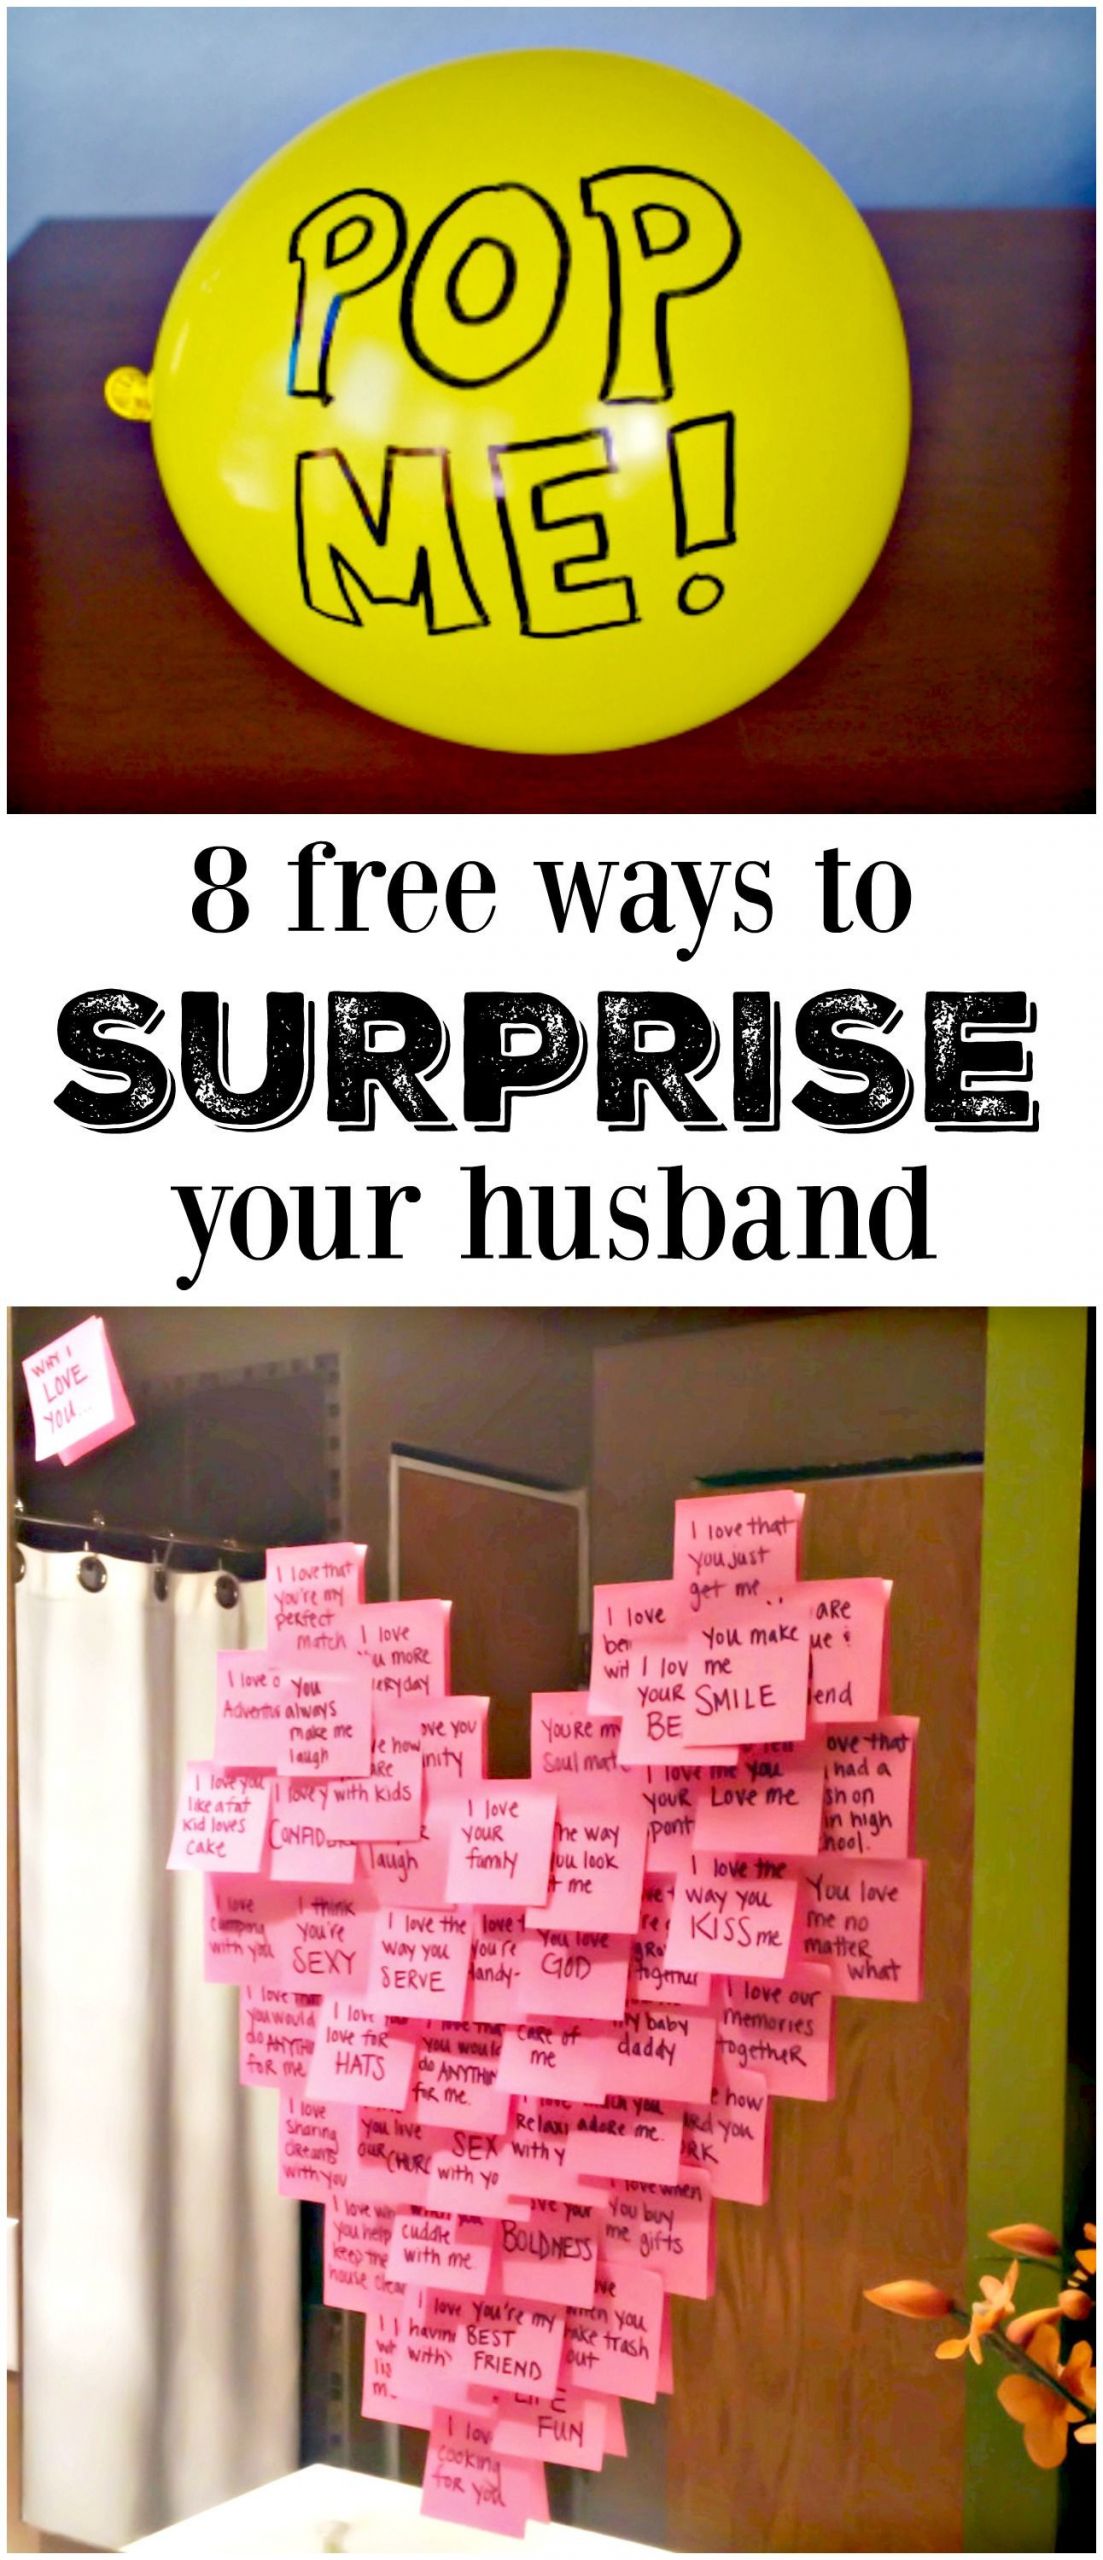 Gift Ideas For Husbands Birthday
 8 Meaningful Ways to Make His Day